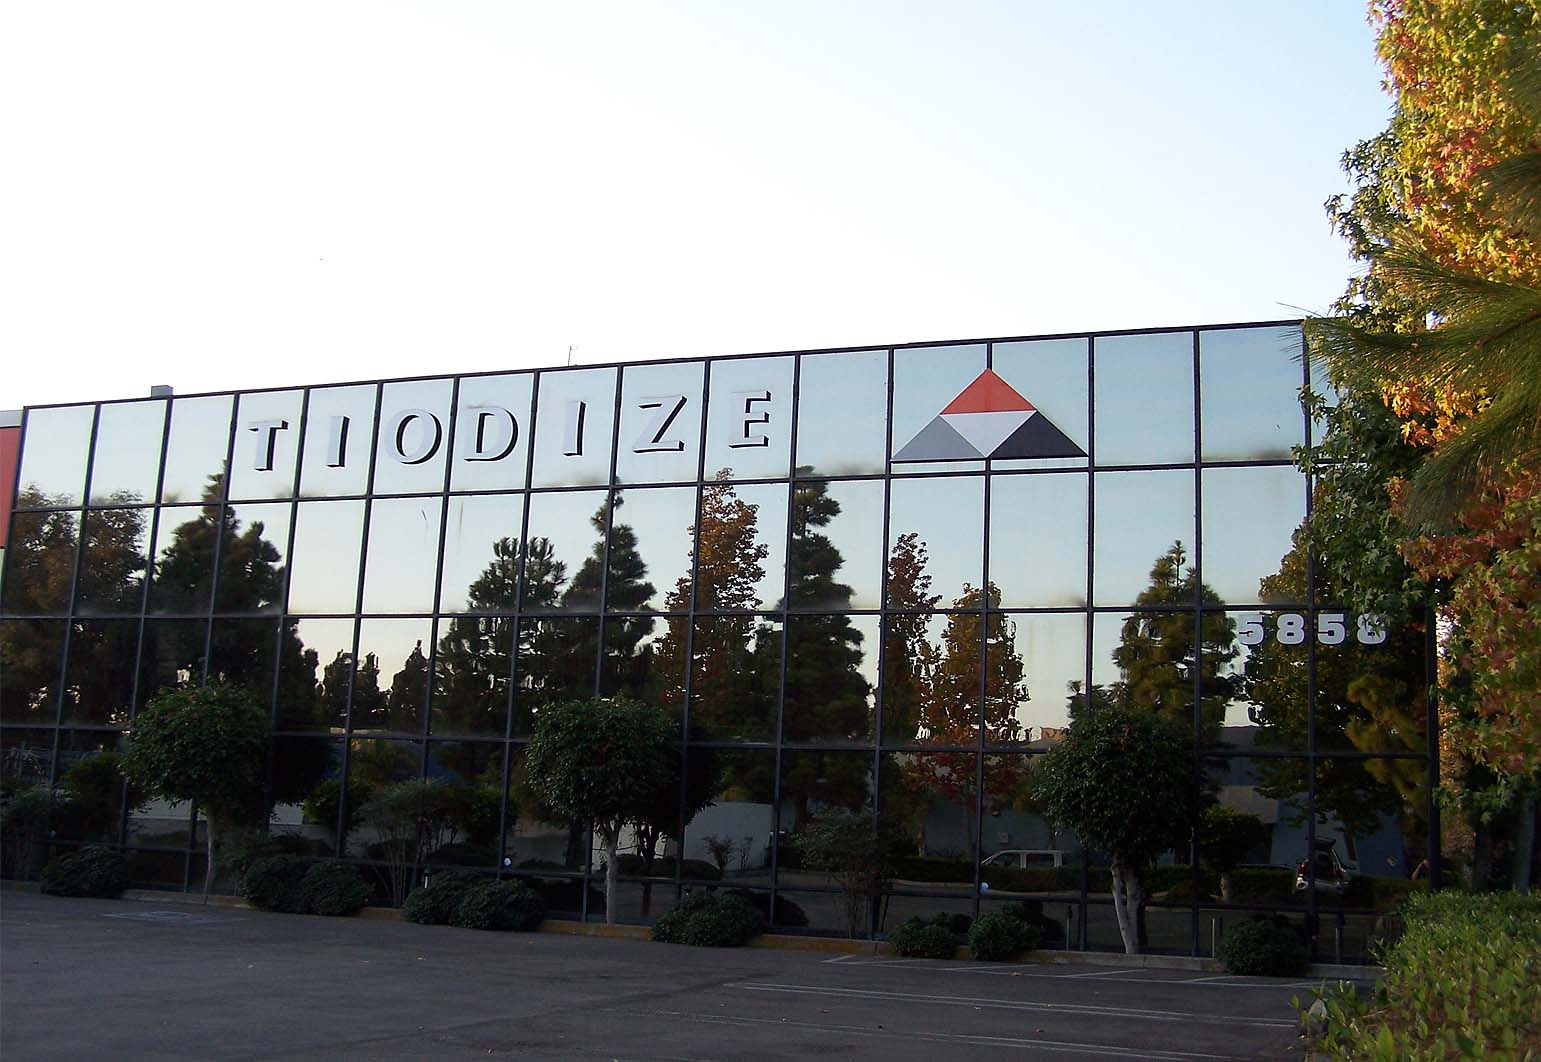 Tiodize is an advanced technology company specializing in the development, manufacture and application of products for the prevention of friction, wear and corrosion